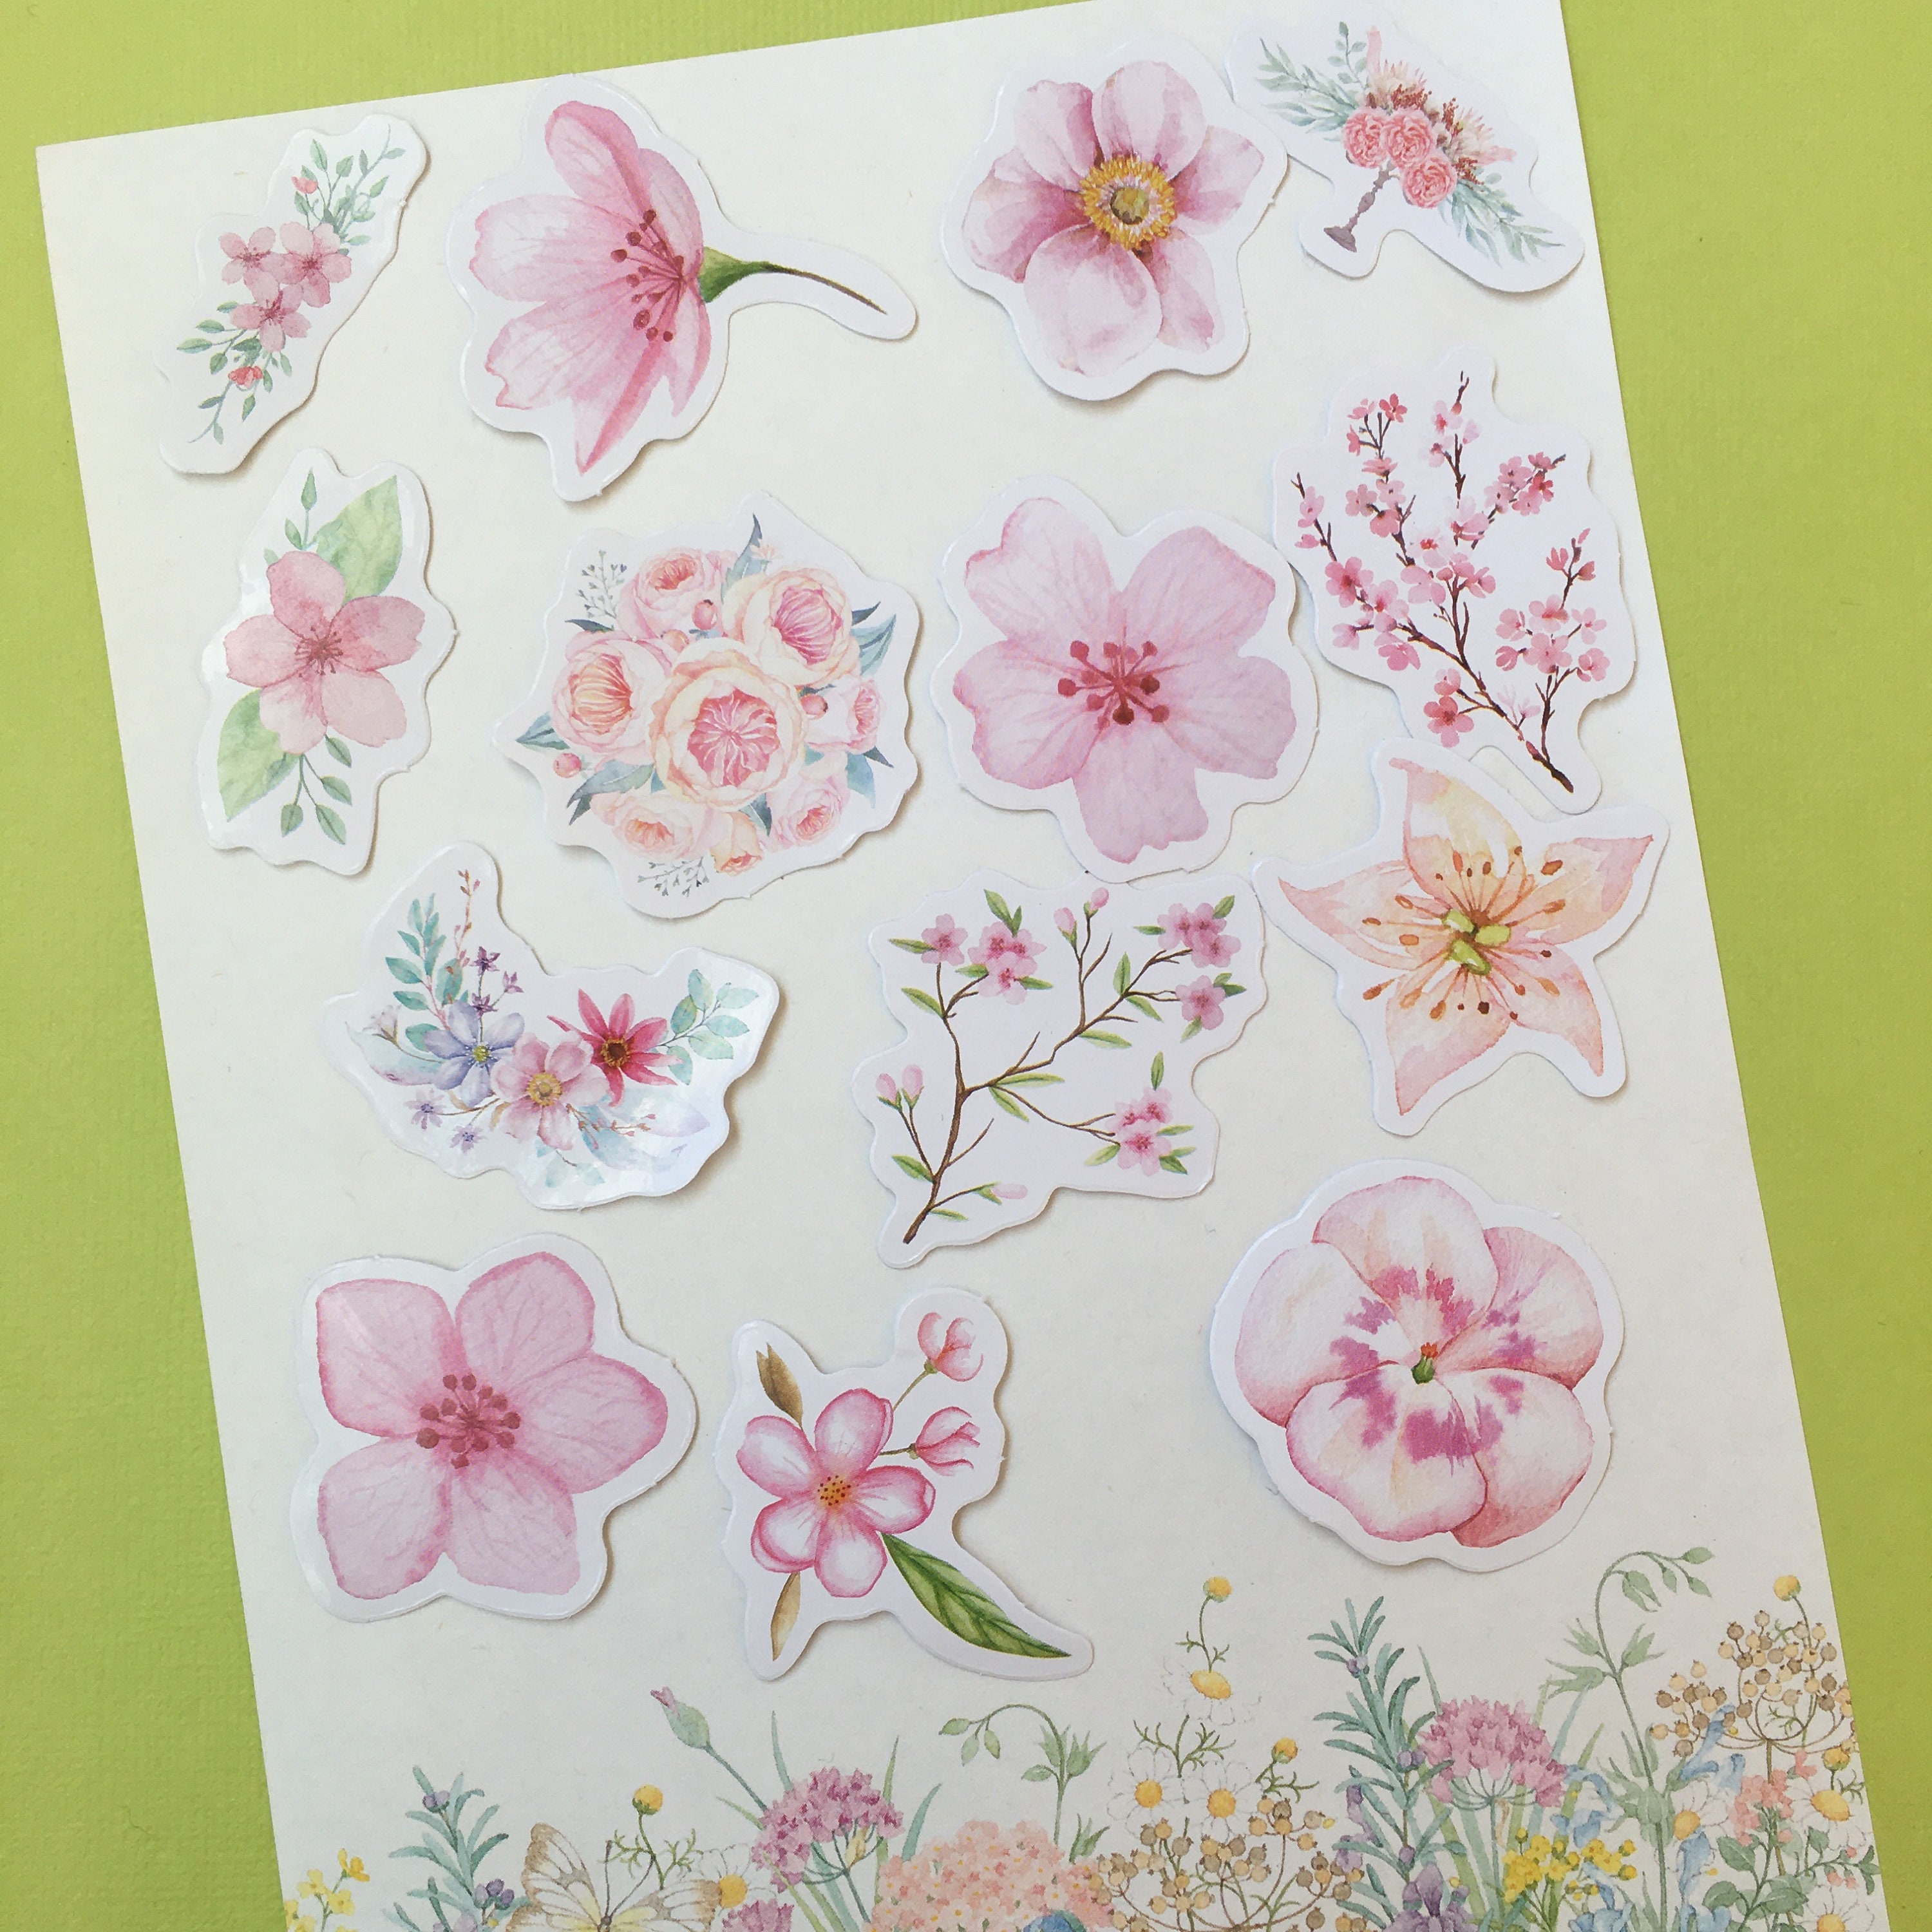 Mo Card Floral Stickers Pink Flower Stickers 45 Pieces | Etsy